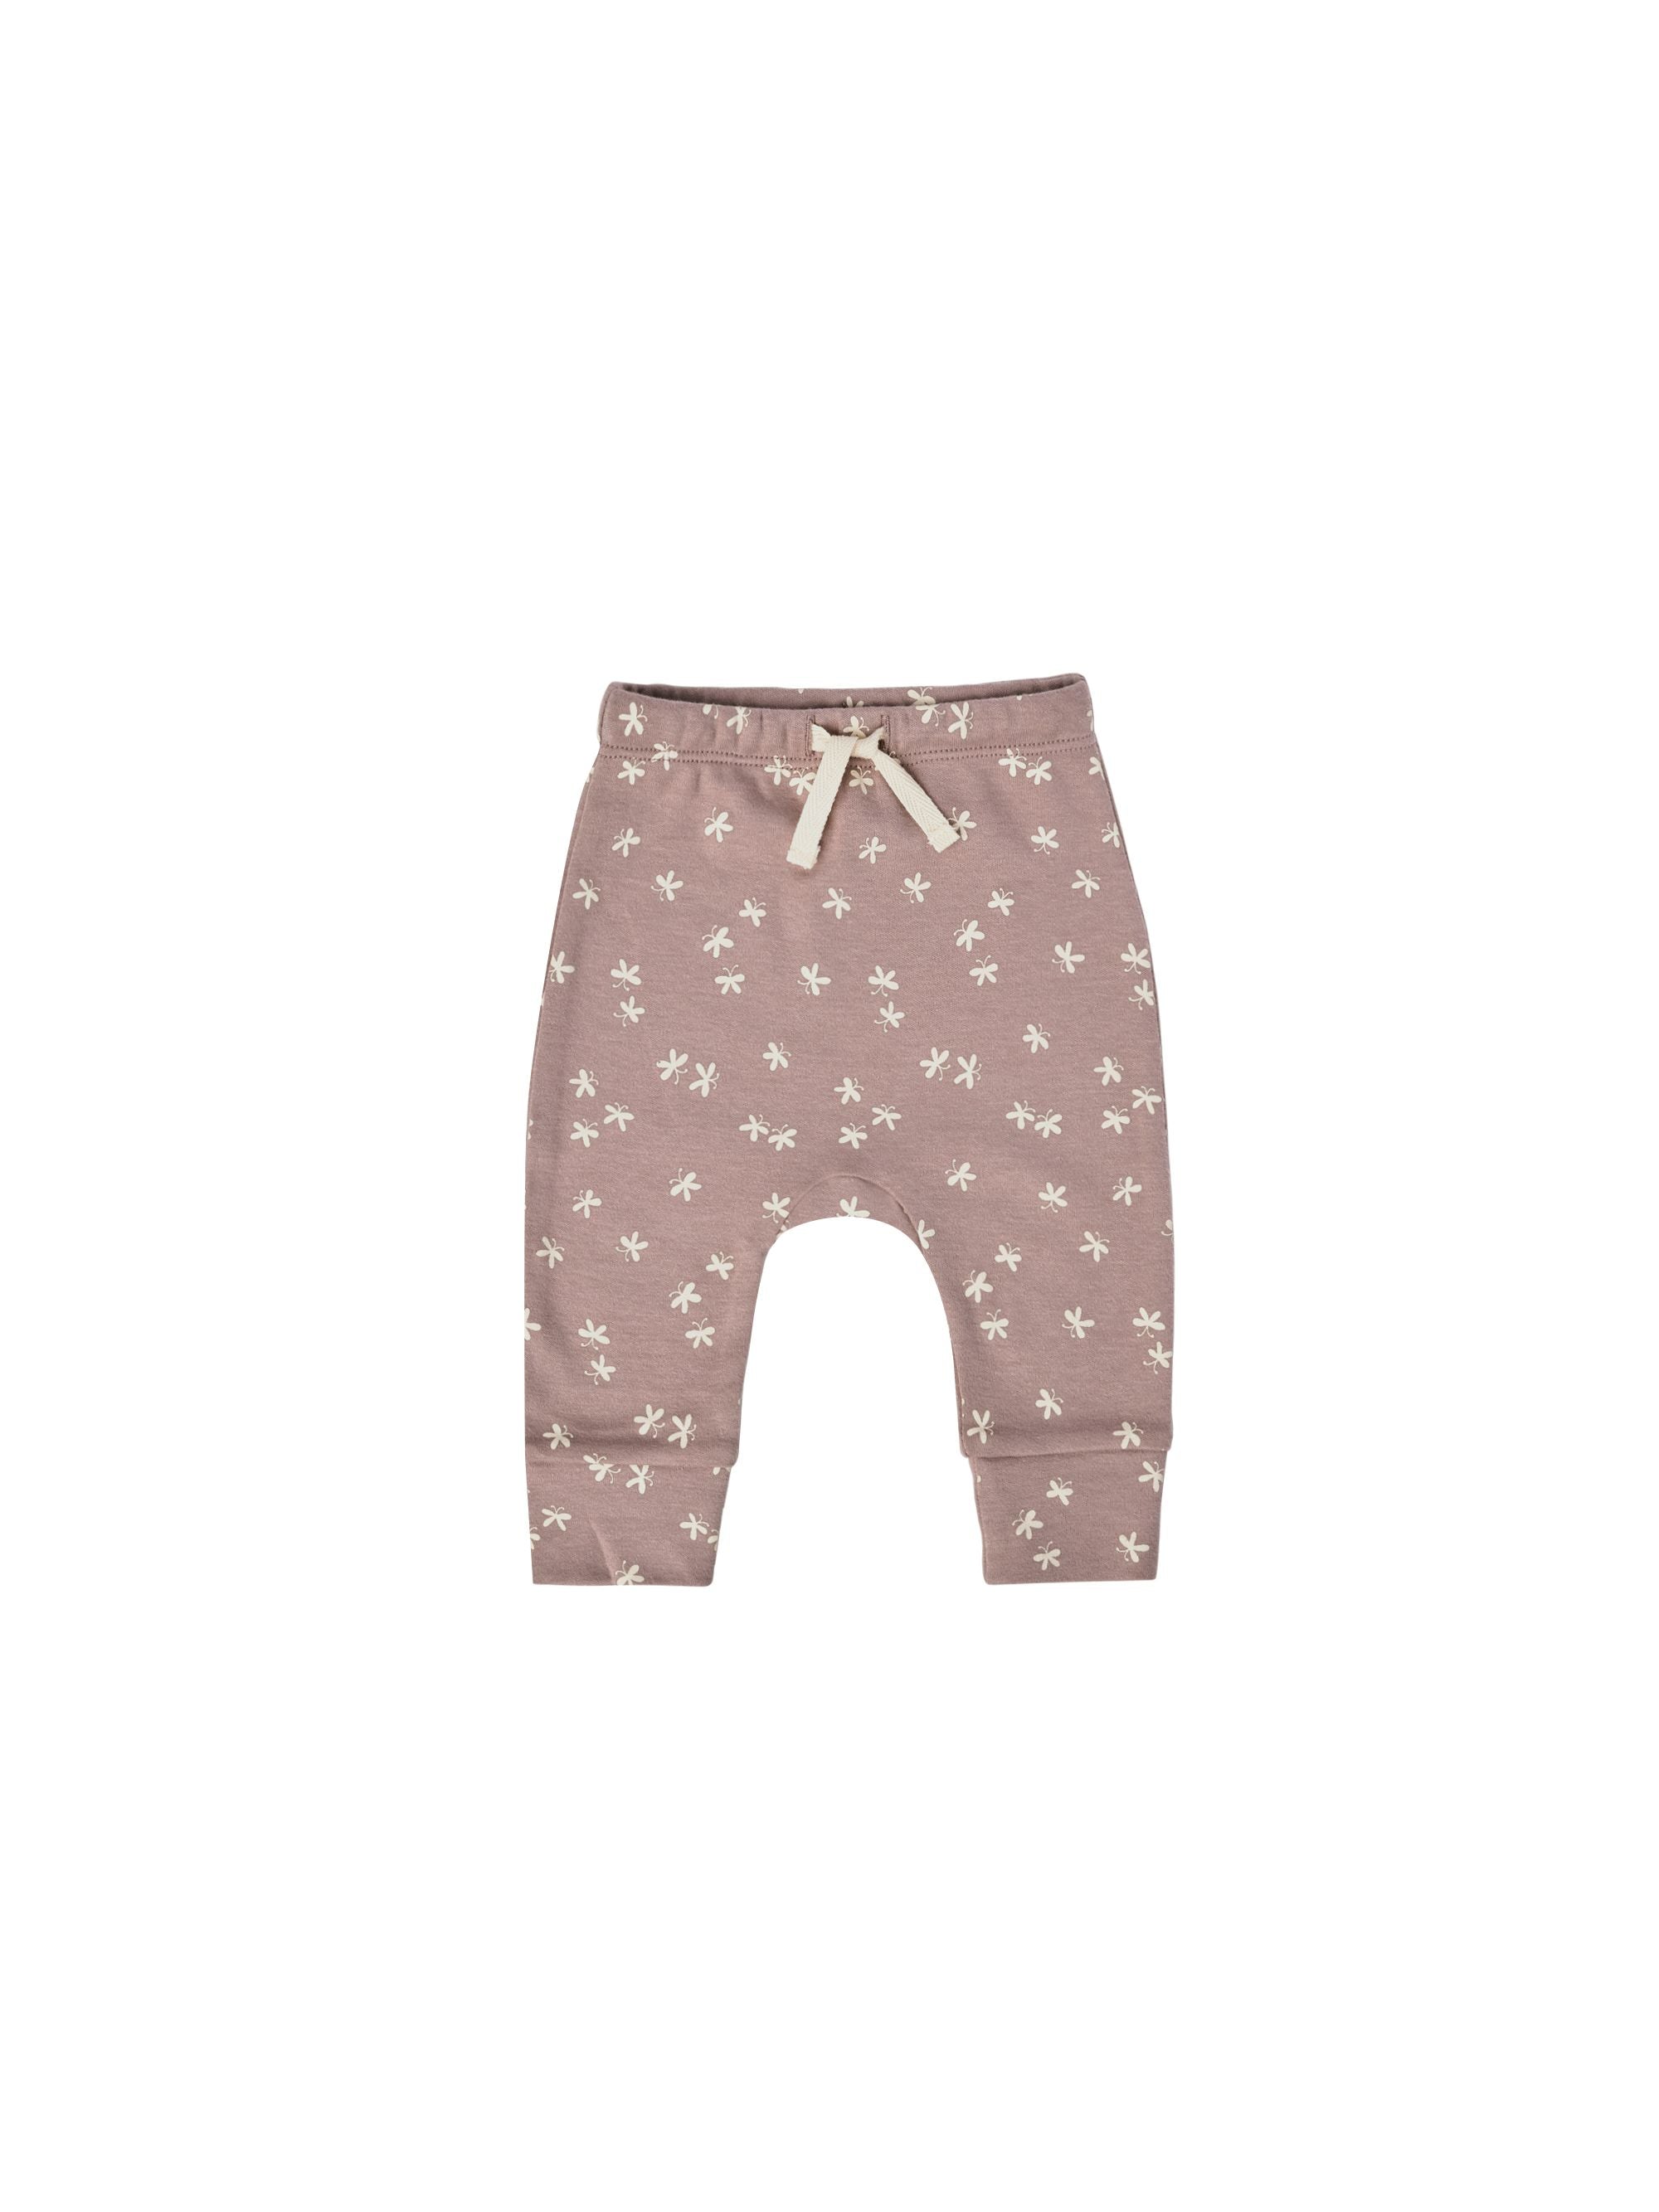 Quincy Mae butterflies drawstring pant against white backdrop